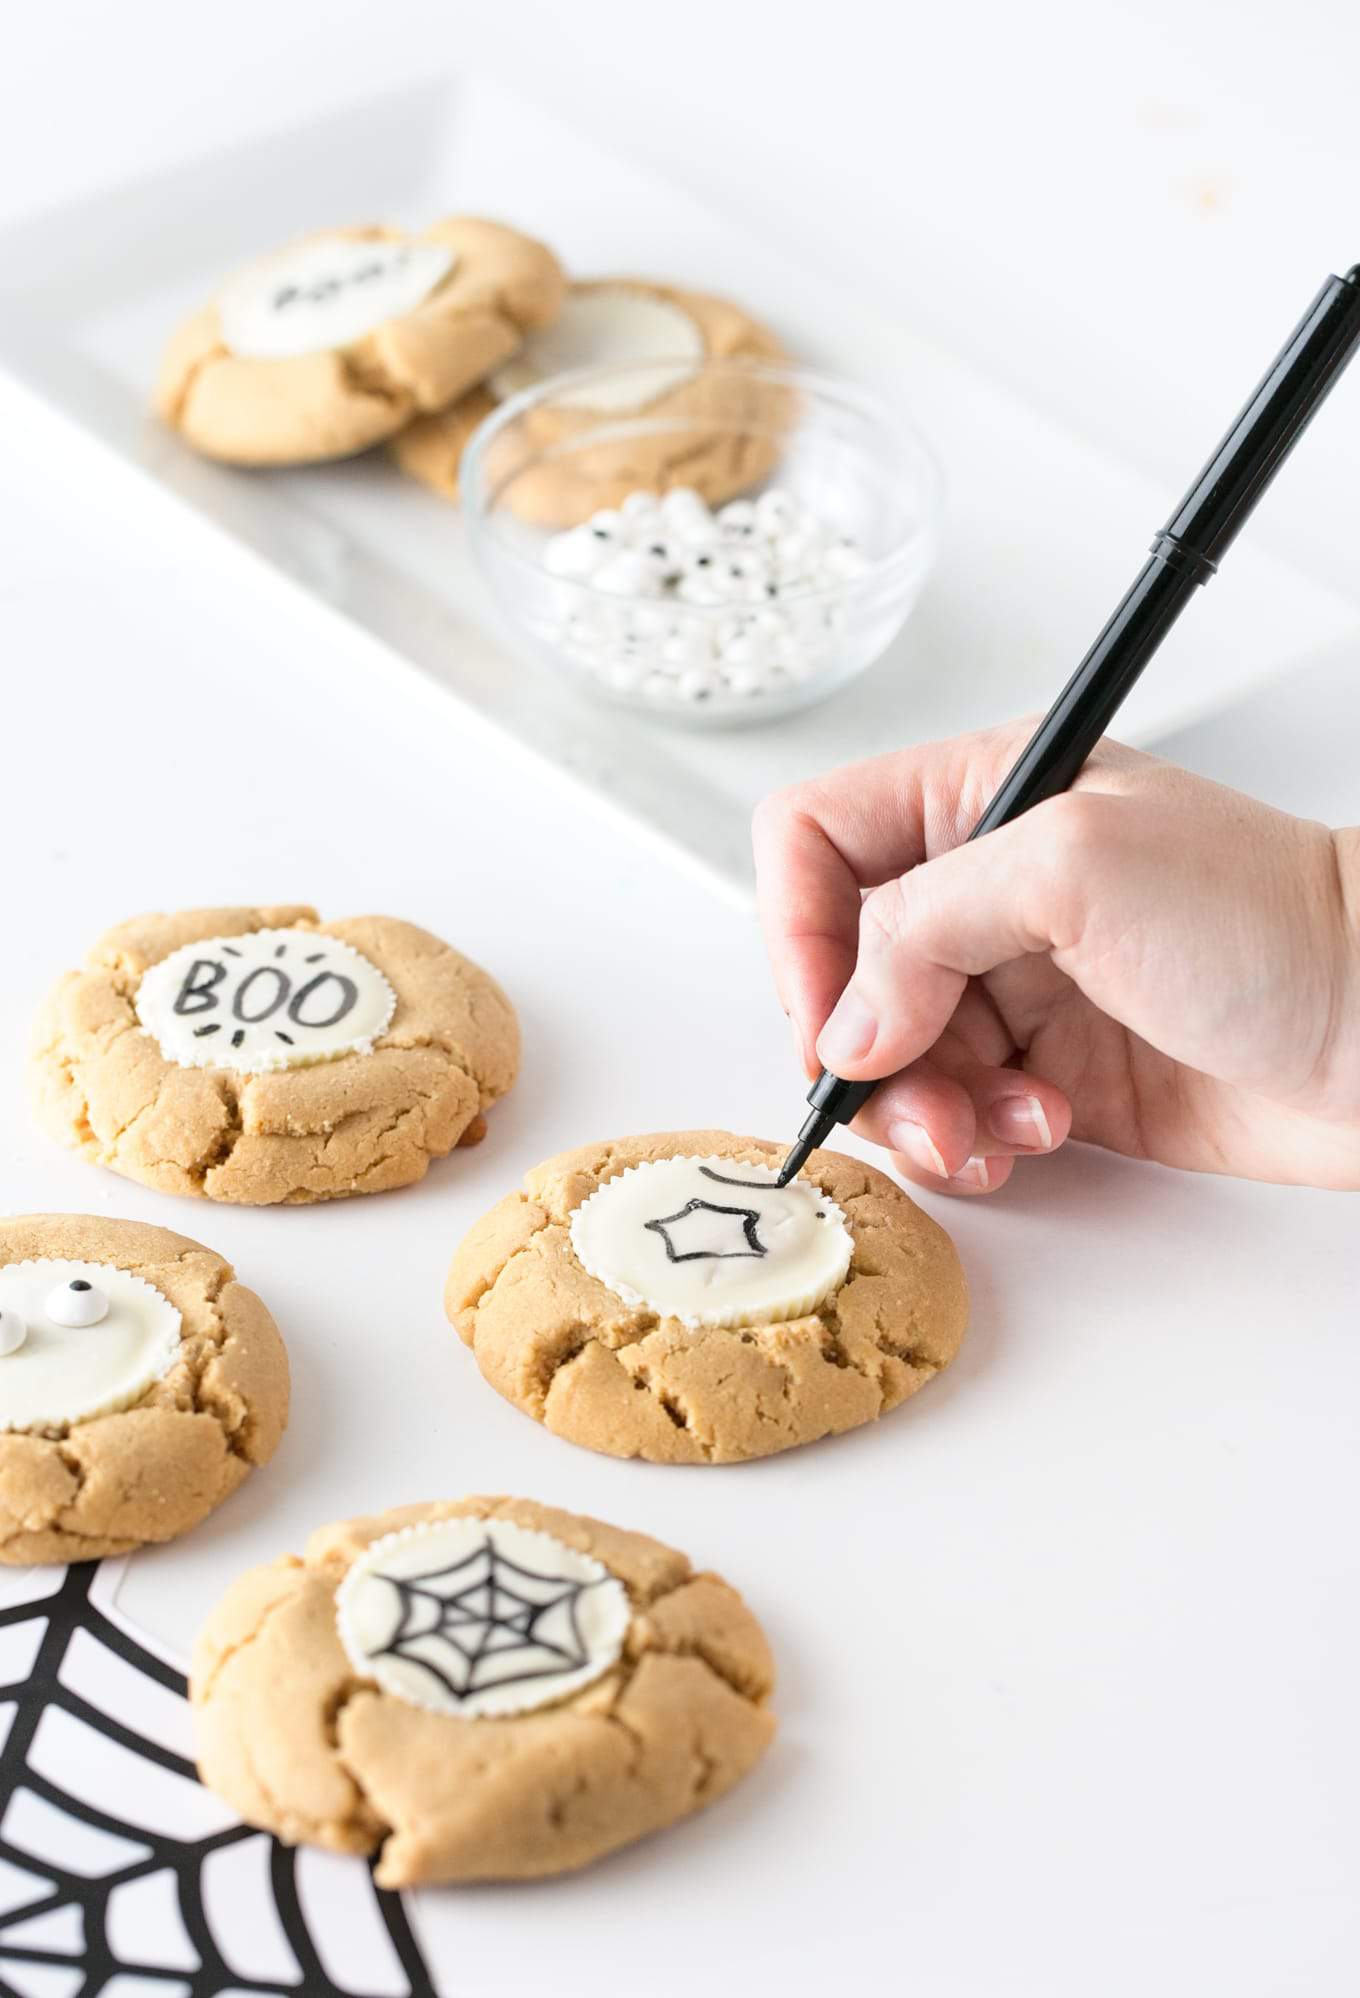 Forget the fancy decorating and grab the edible food pen to draw-your-own easy Halloween cookies! Using a traditional peanut butter cup as the "canvas", you can customize with your own icons, faces or spooktacular phrases! #Halloween | #Cookies | www.DesignEatRepeat.com